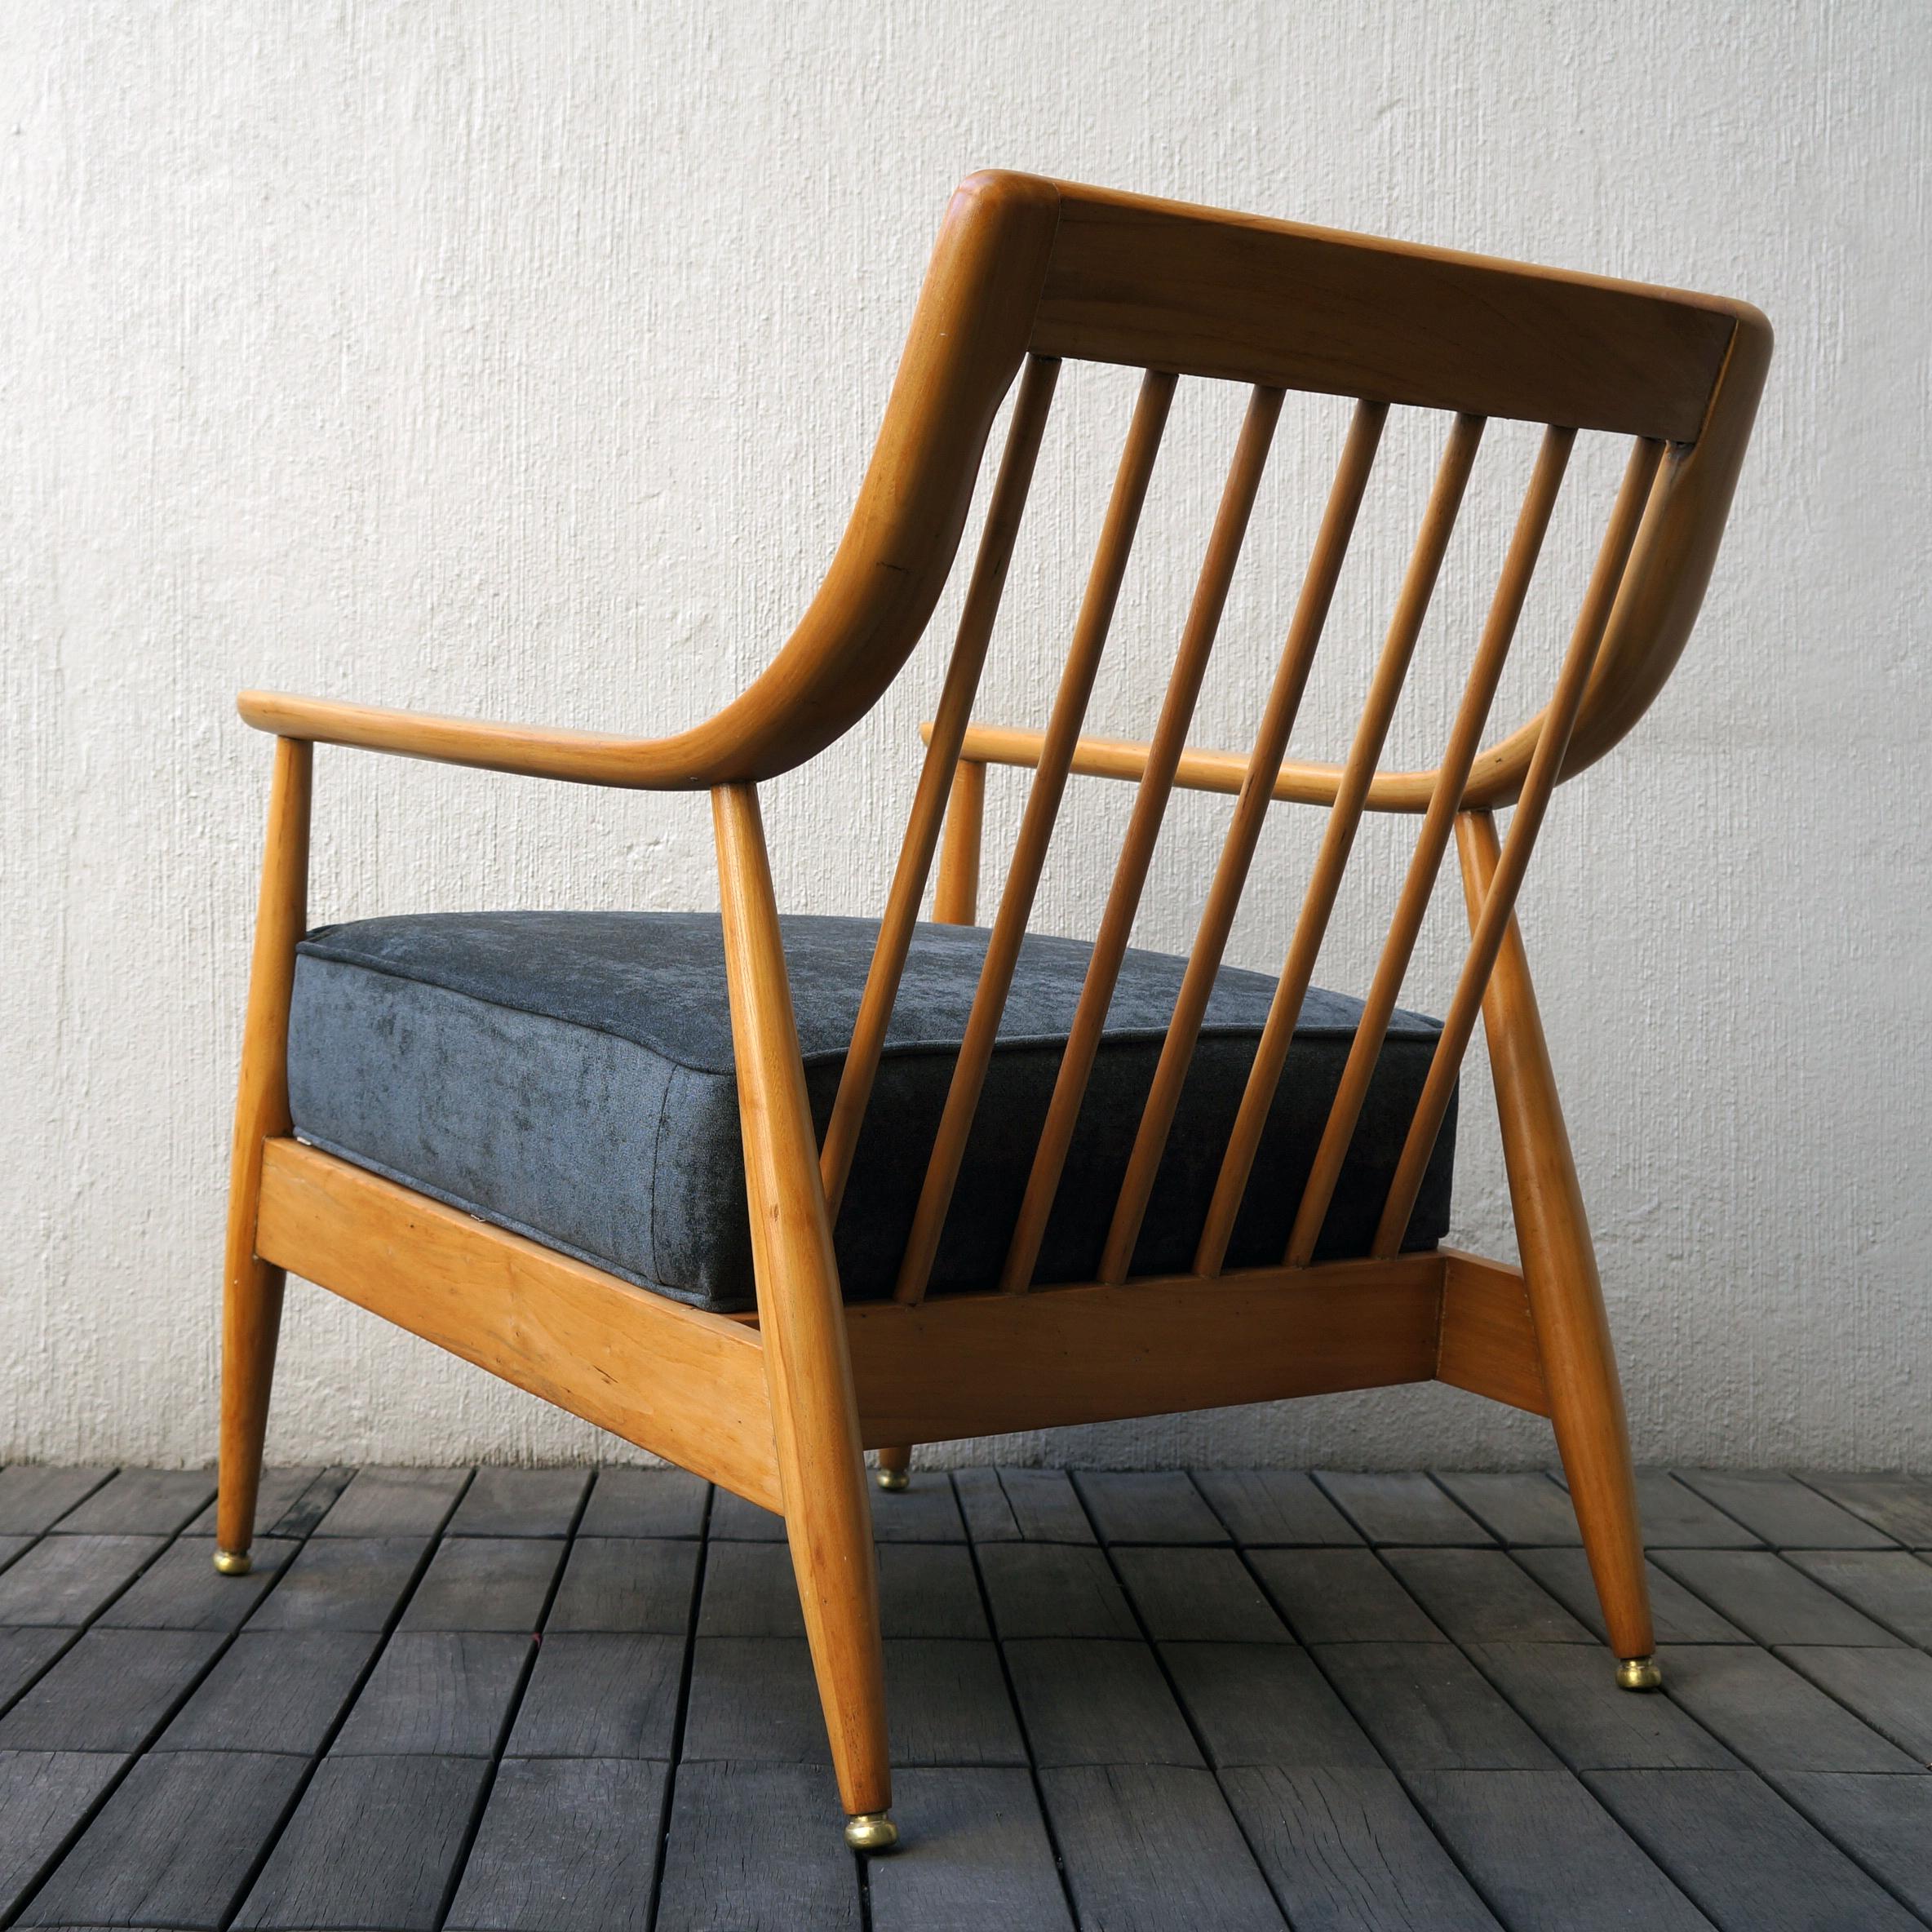 Mid-20th Century Mexican Midcentury Lounge Chair, “Malinche